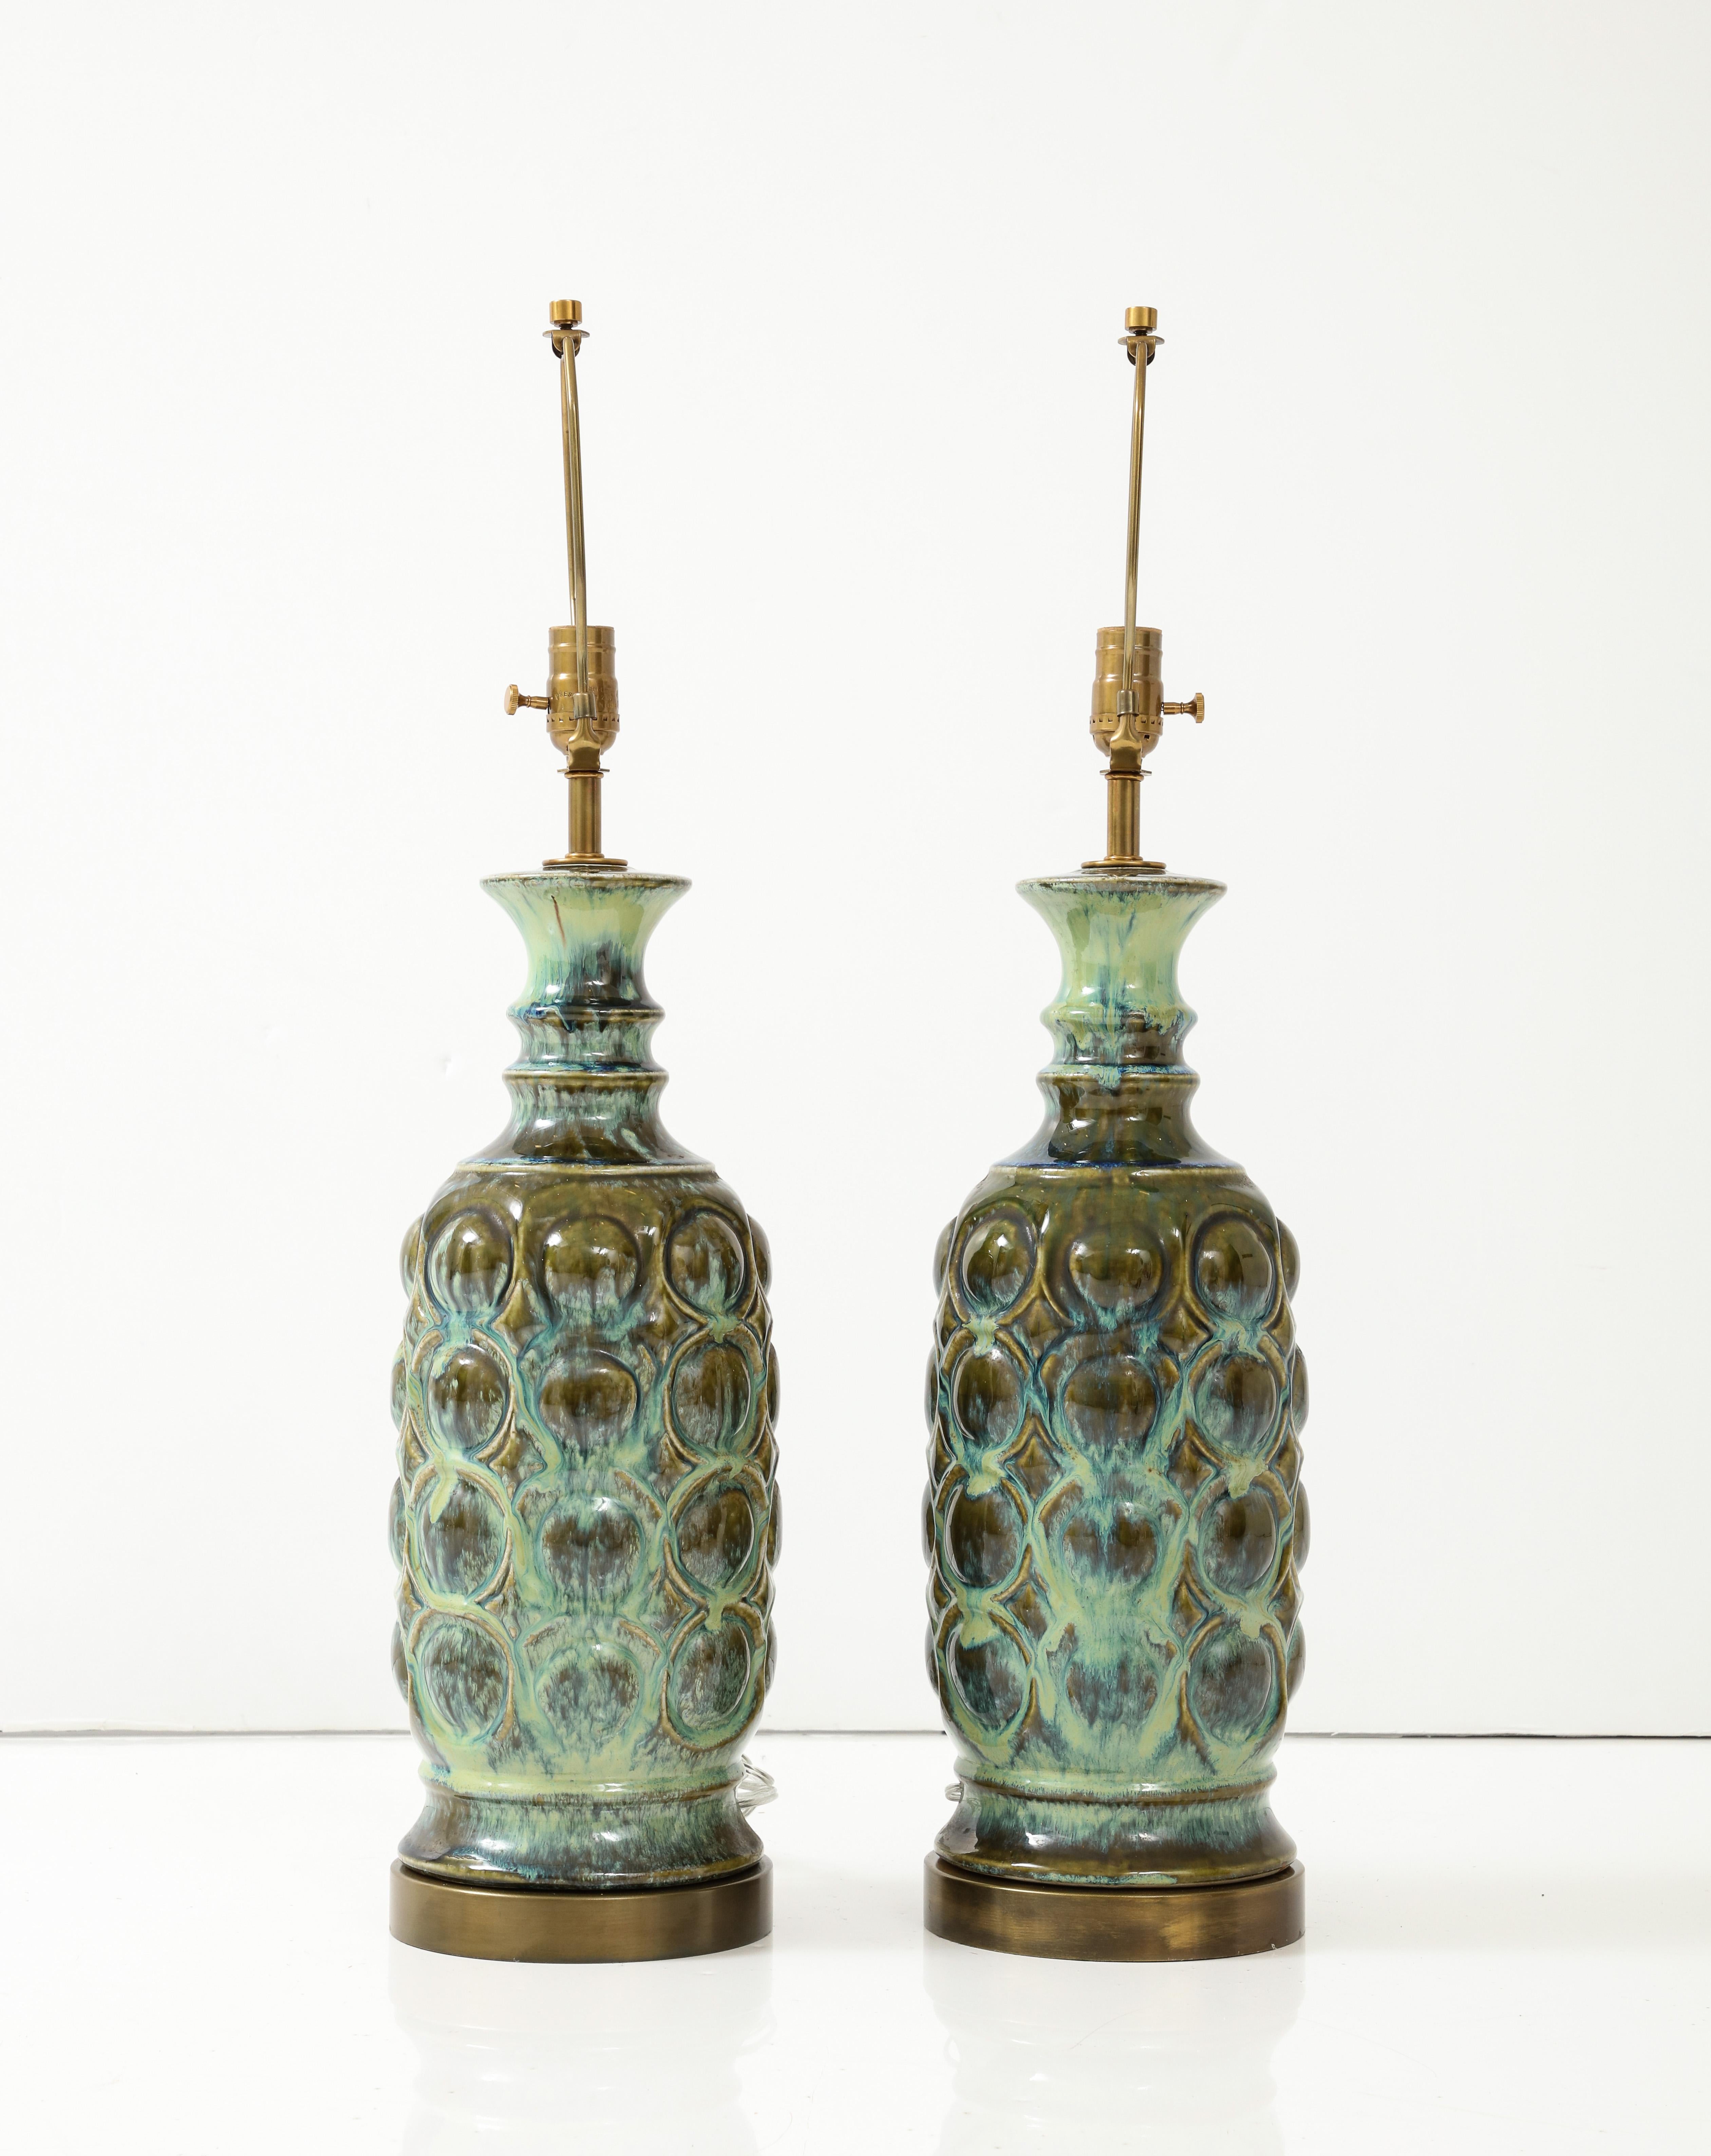 Pair of Scandinavian Modern ceramic lamps featuring a mottled blue/green glaze resting on aged brass bases. Lamps have been rewired for use in USA by an UL listed electrician. 100W bulbs max. 